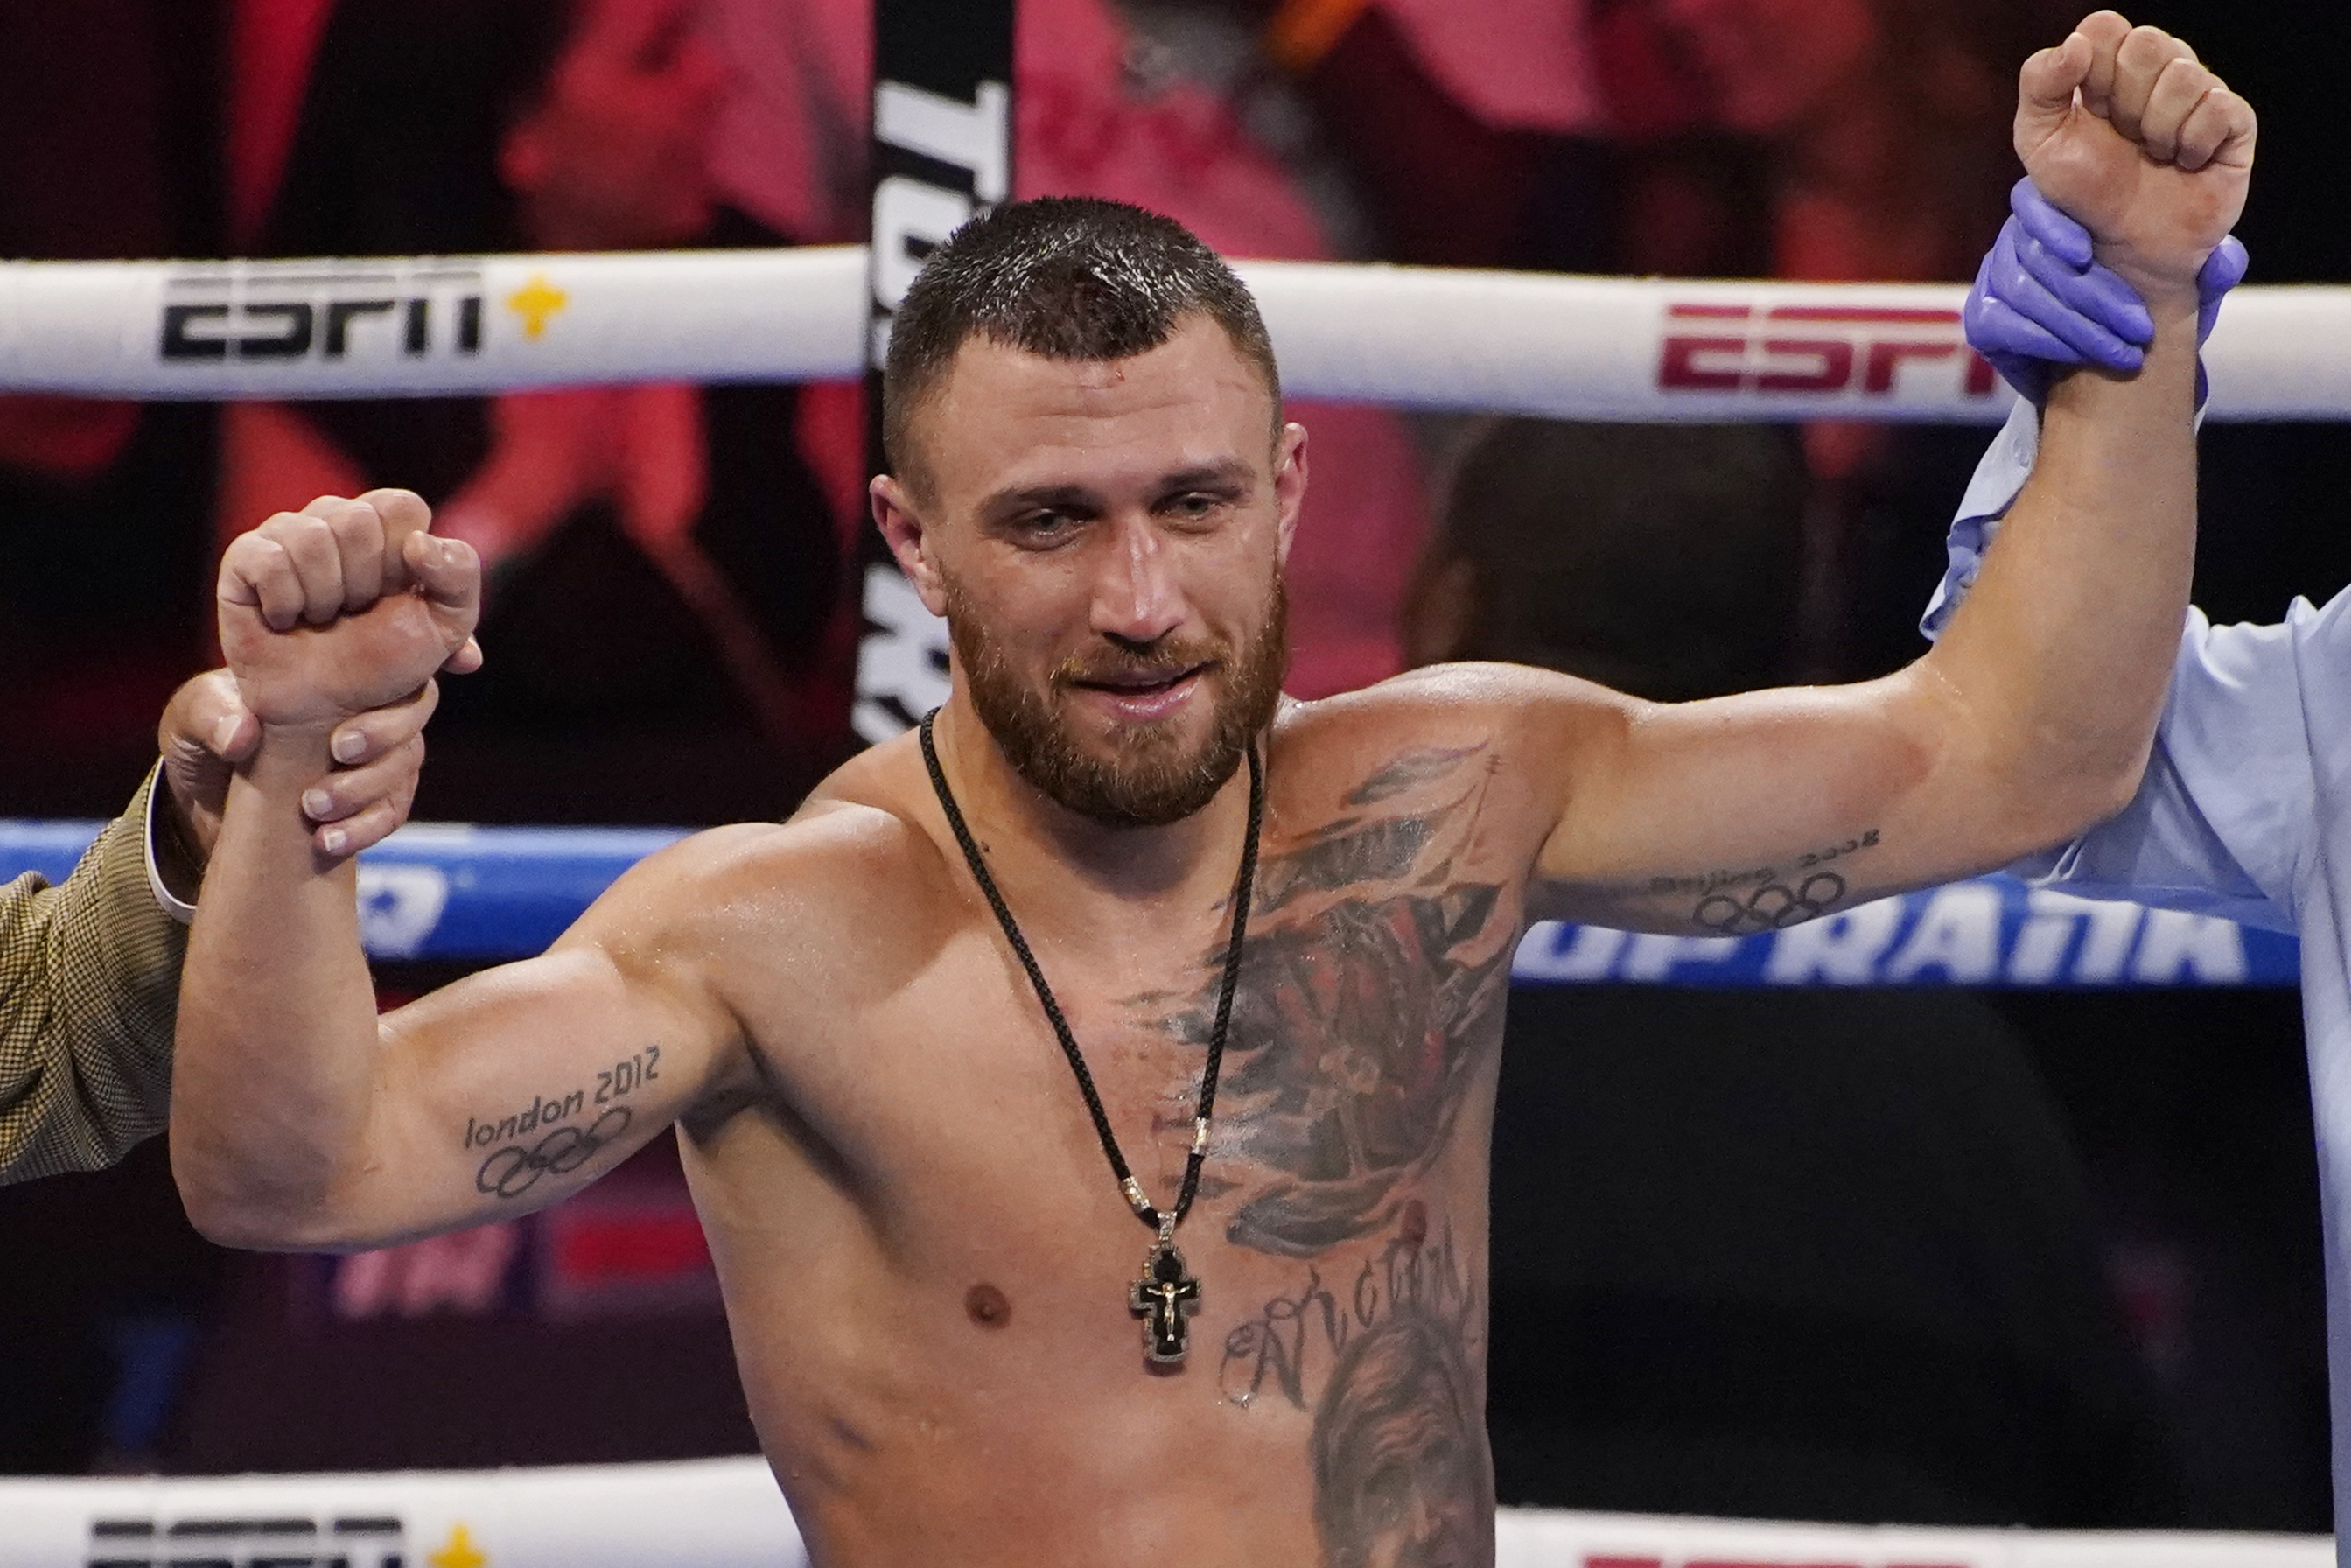 After fighting for Ukraine, Lomachenko fights again in ring